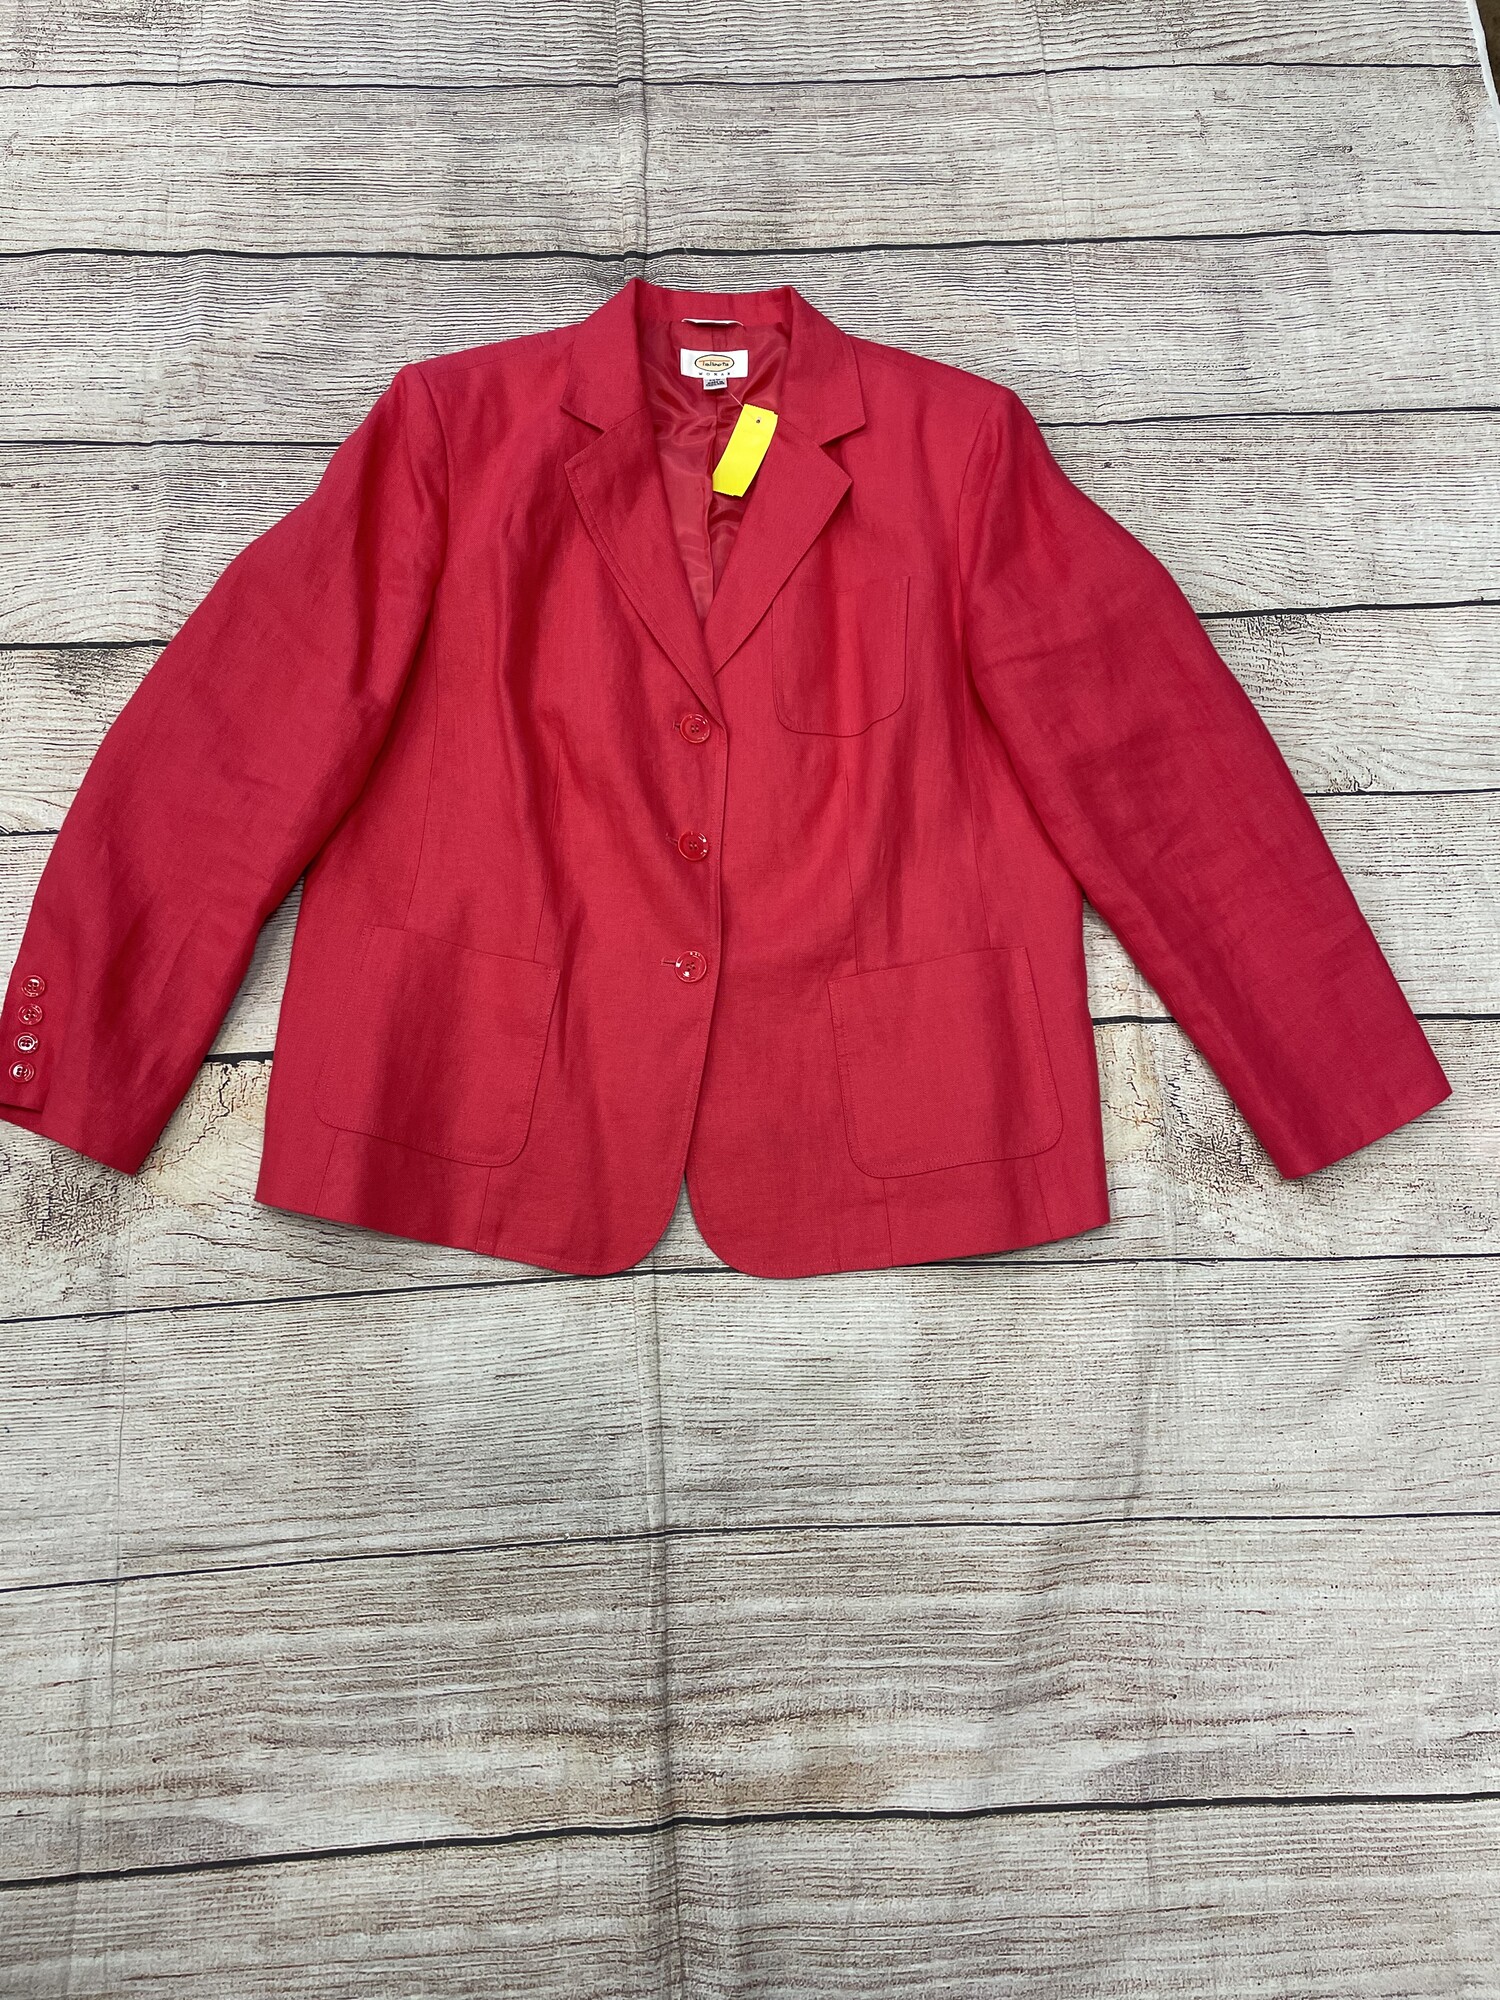 Talbots Irish Linen Jacket, Coral Pink, Button Front and Three Front Pockets, Size: XL (14W)